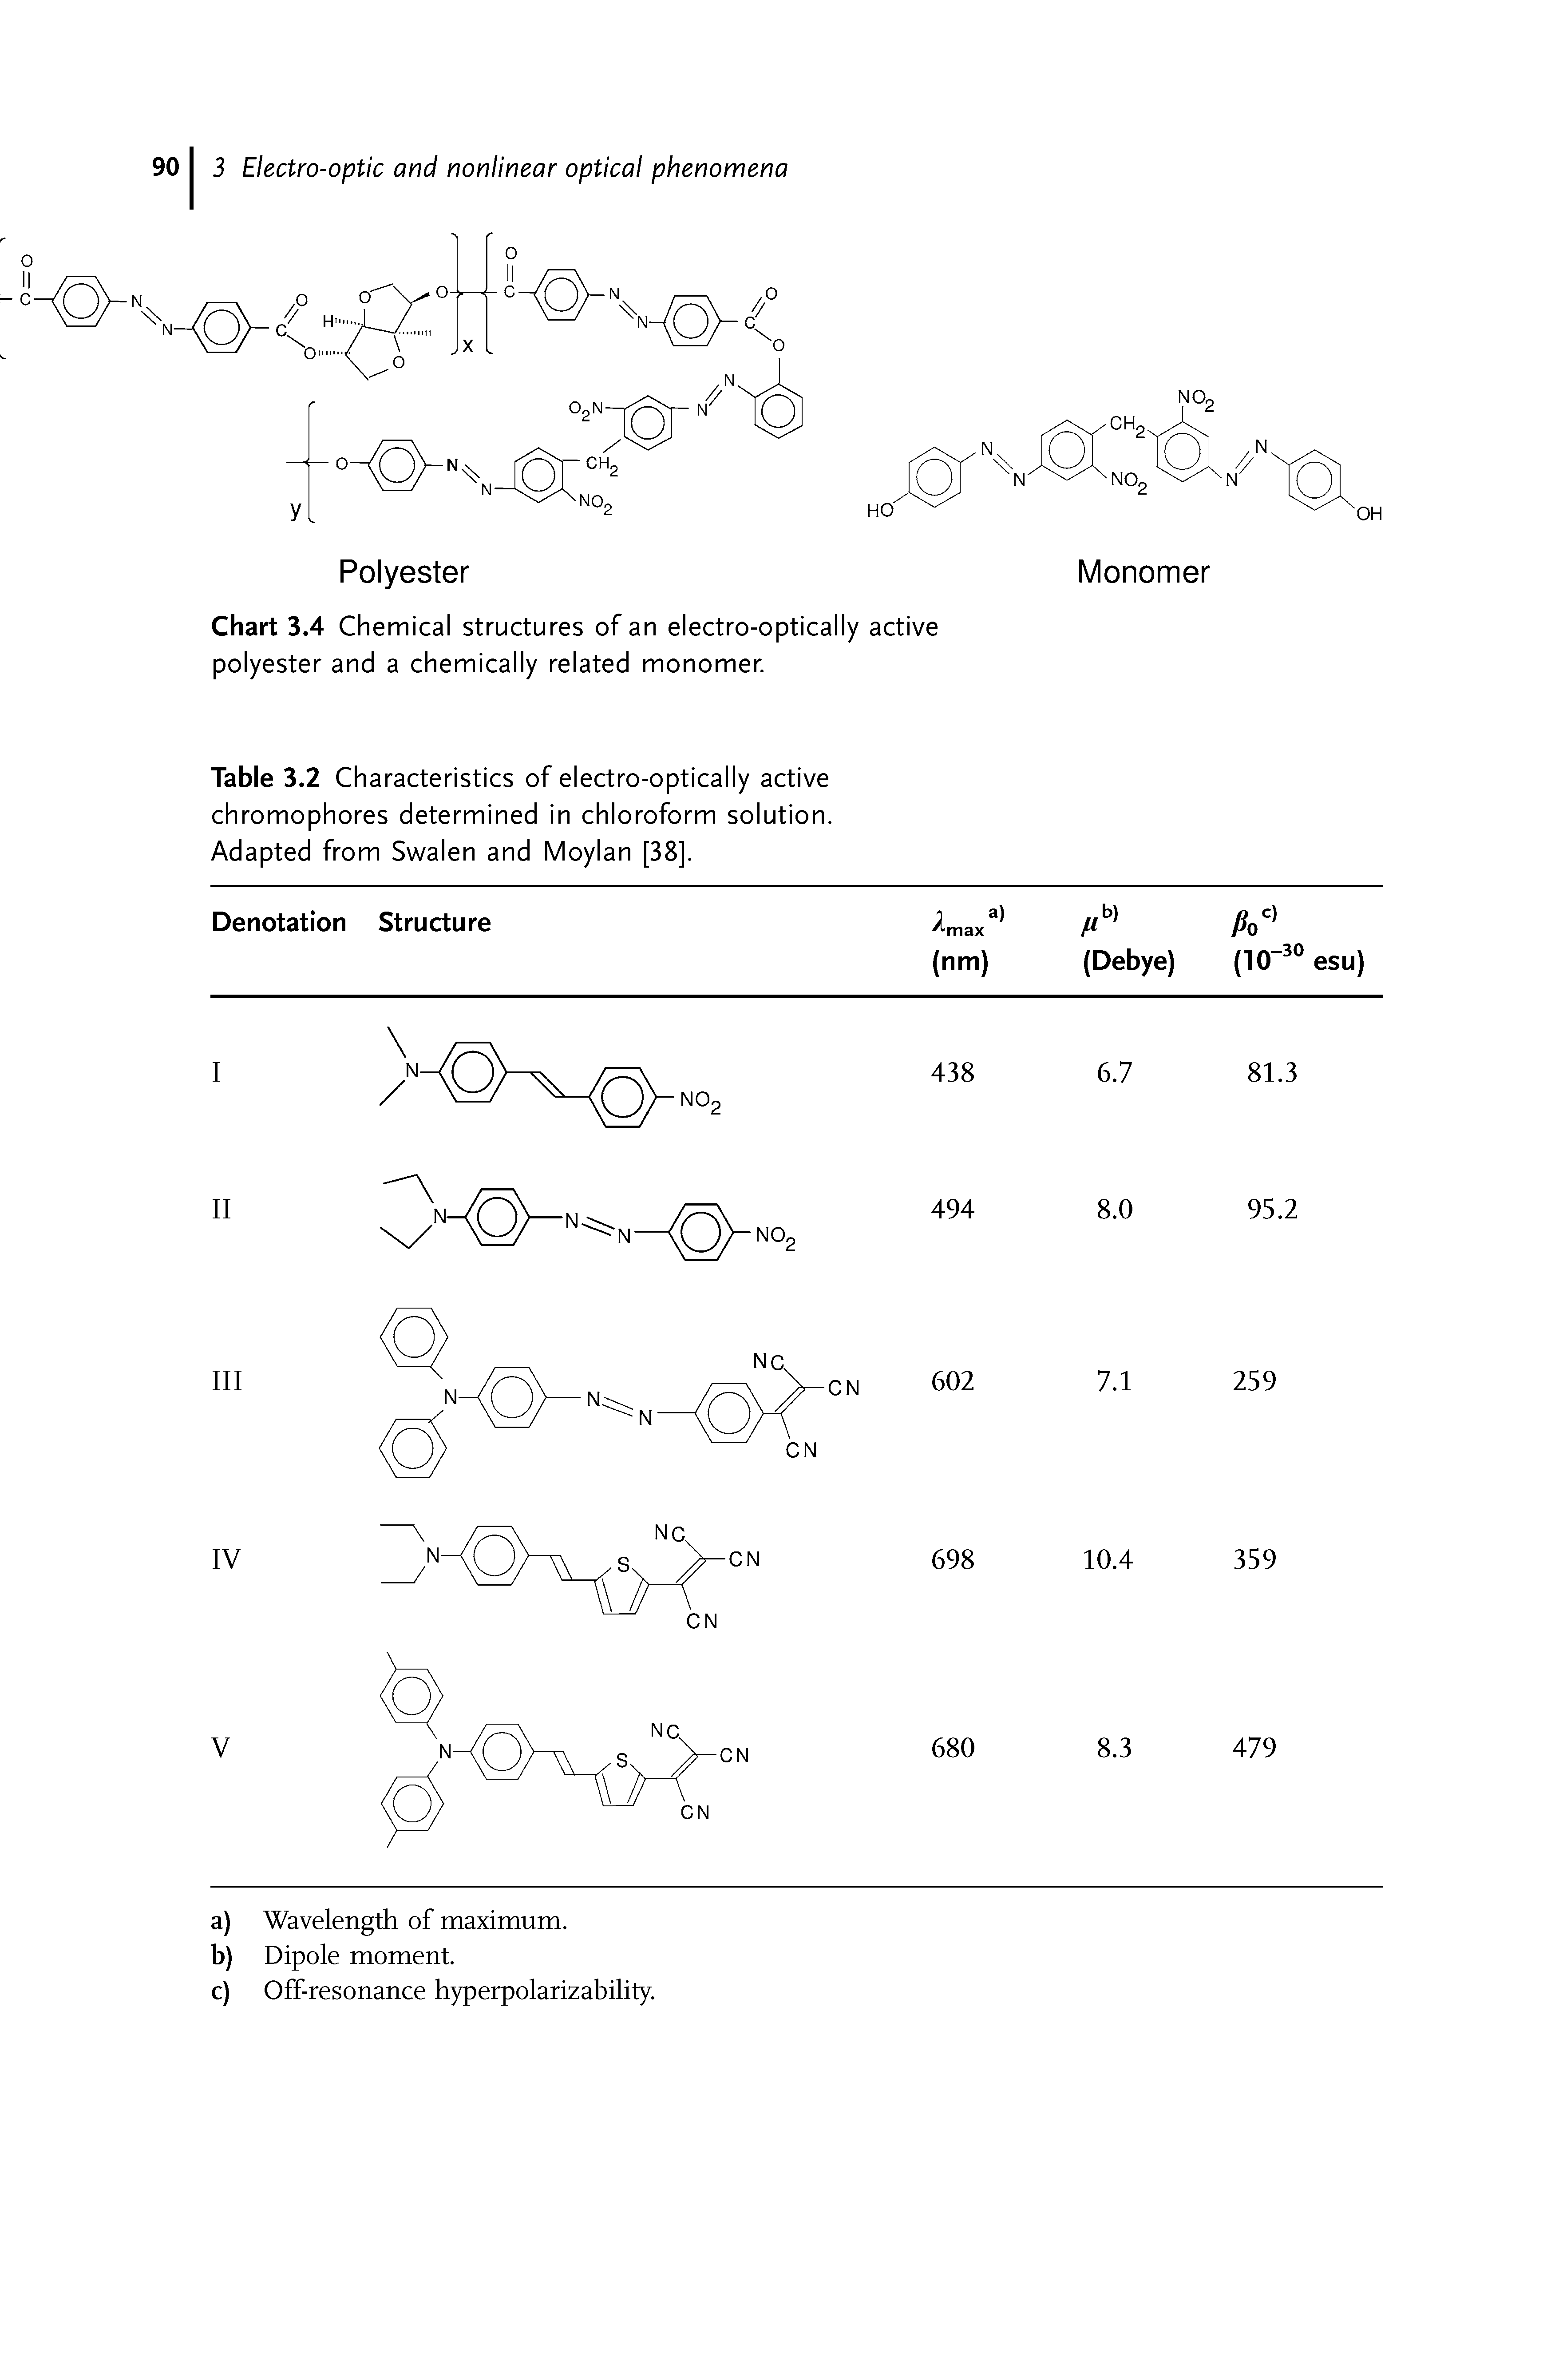 Table 3.2 Characteristics of electro-optically active chromophores determined in chloroform solution. Adapted from Swalen and Moylan [38].